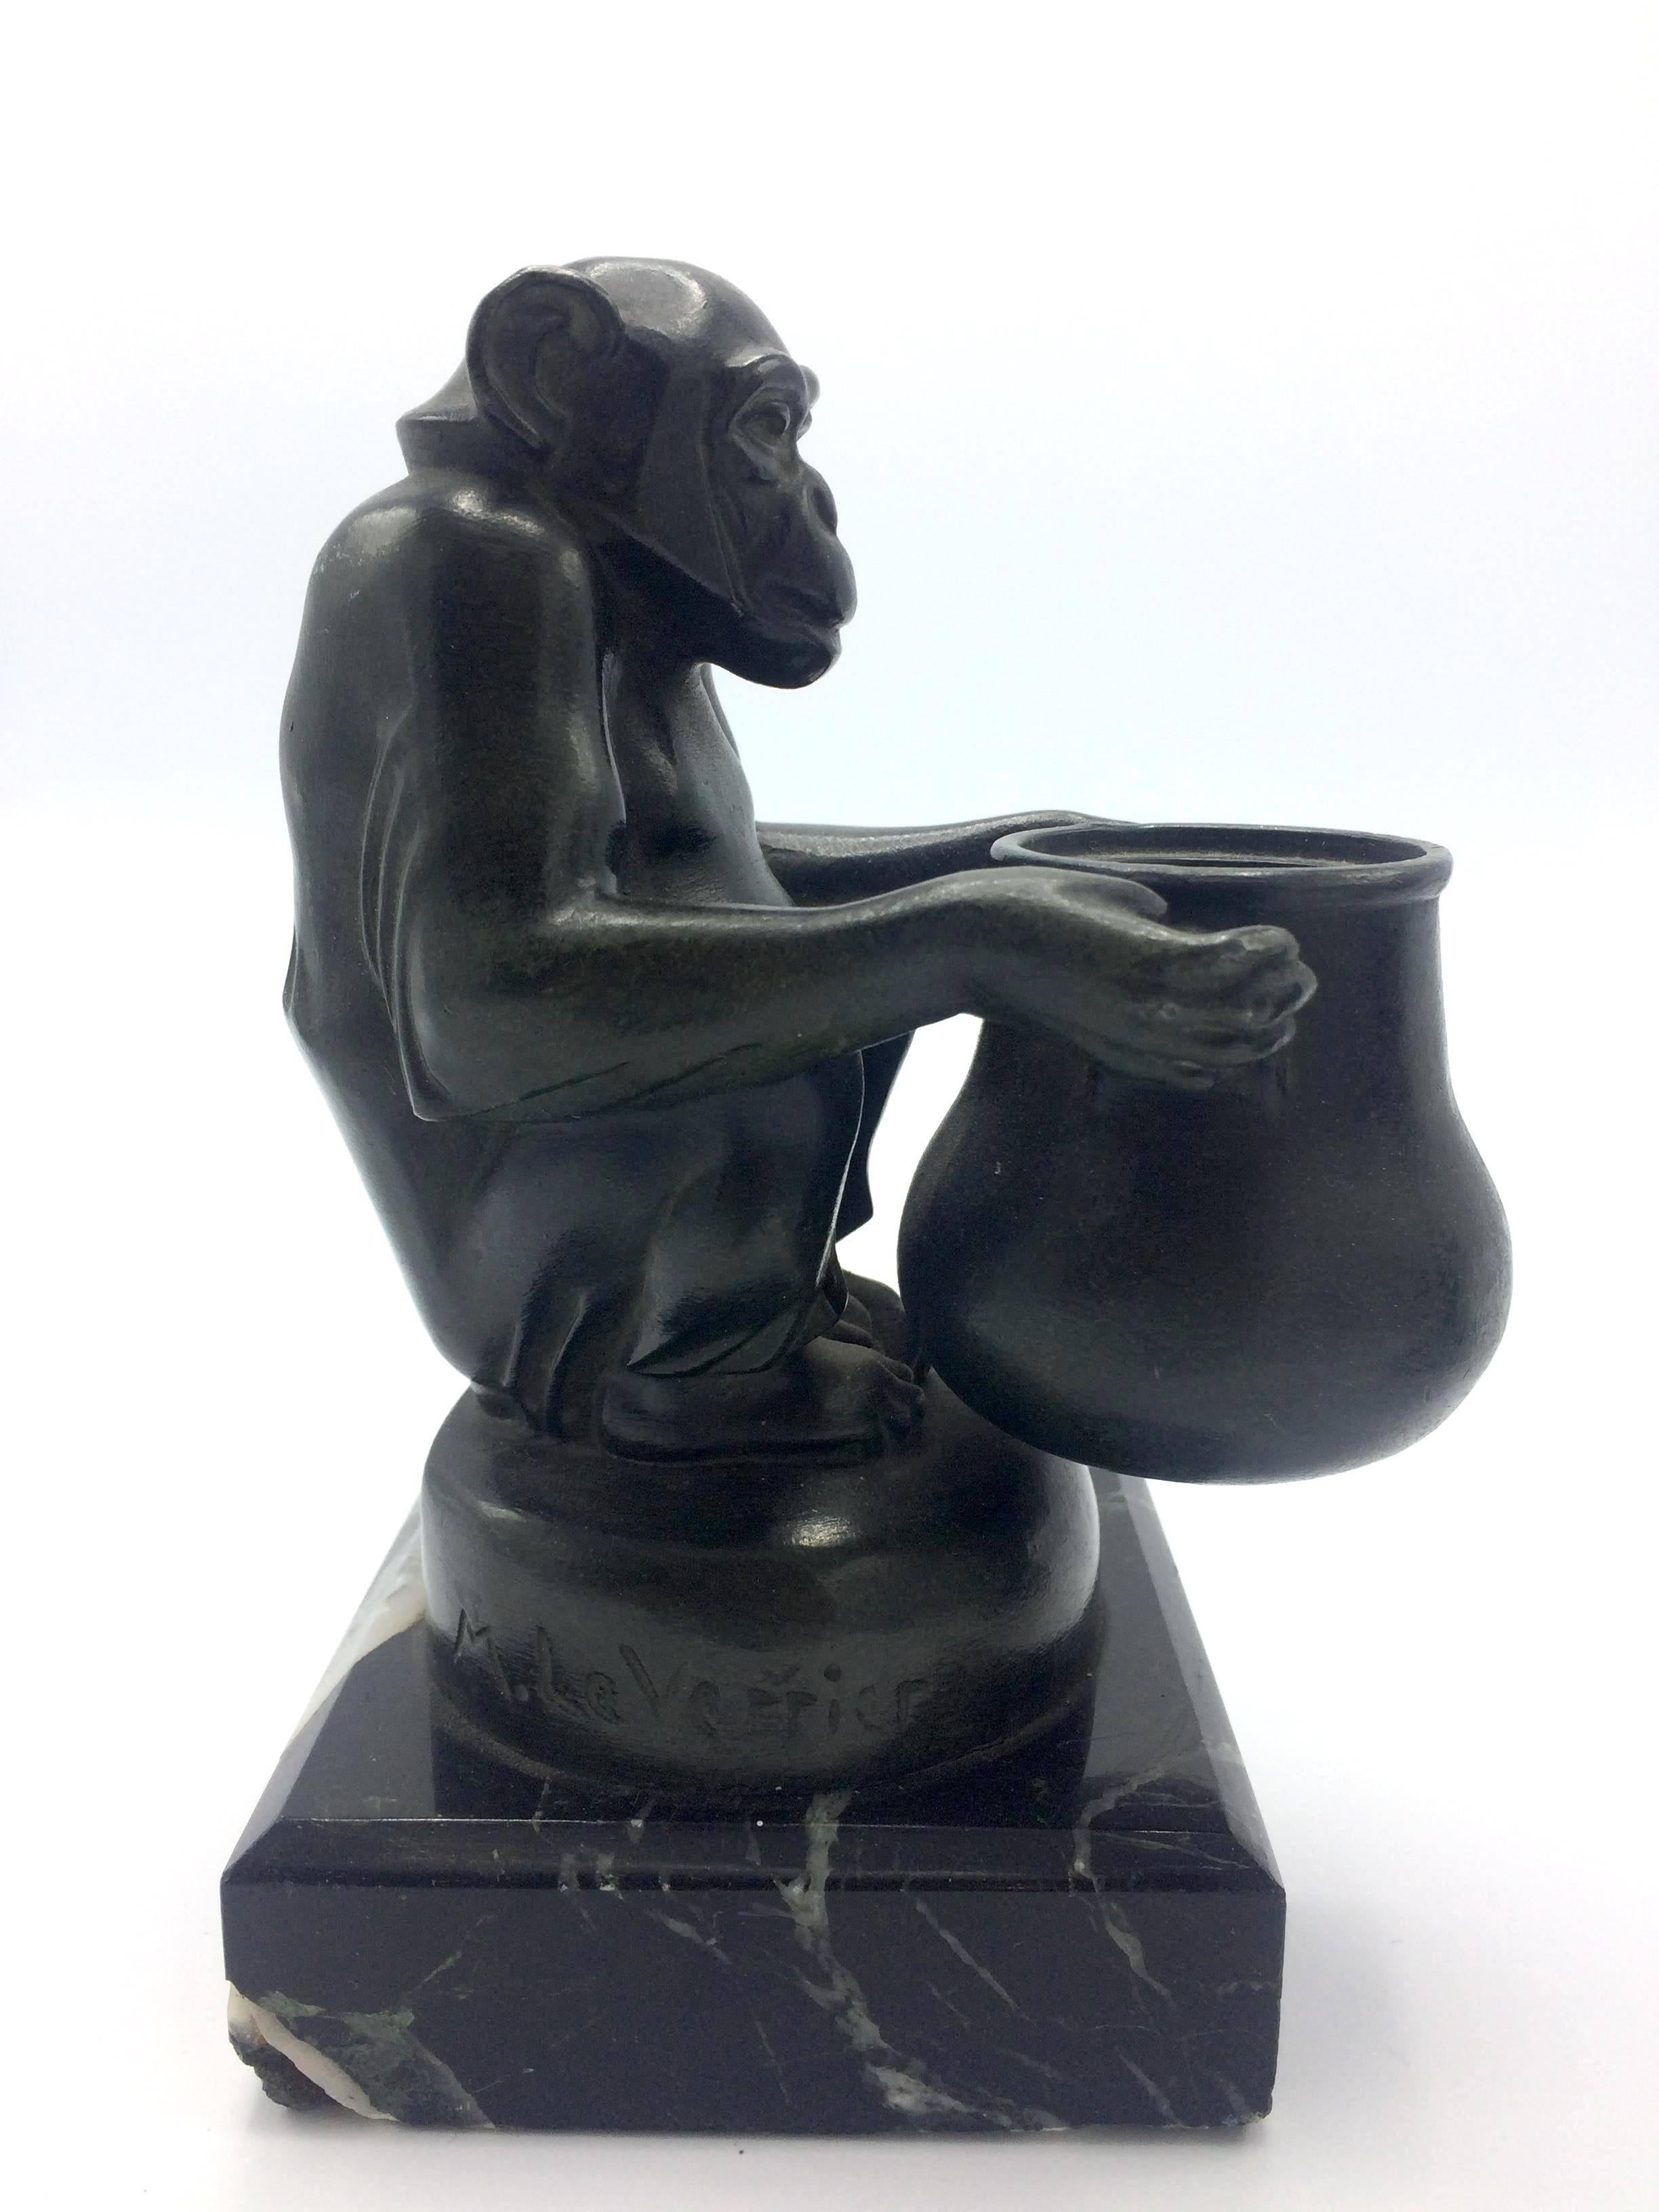 For your consideration,

These Art Deco sculptures of a monkey holding an inkwell are the creation of one of the most iconic and important sculptors of the 1920s and 1930s, Max Le Verrier. Meet 